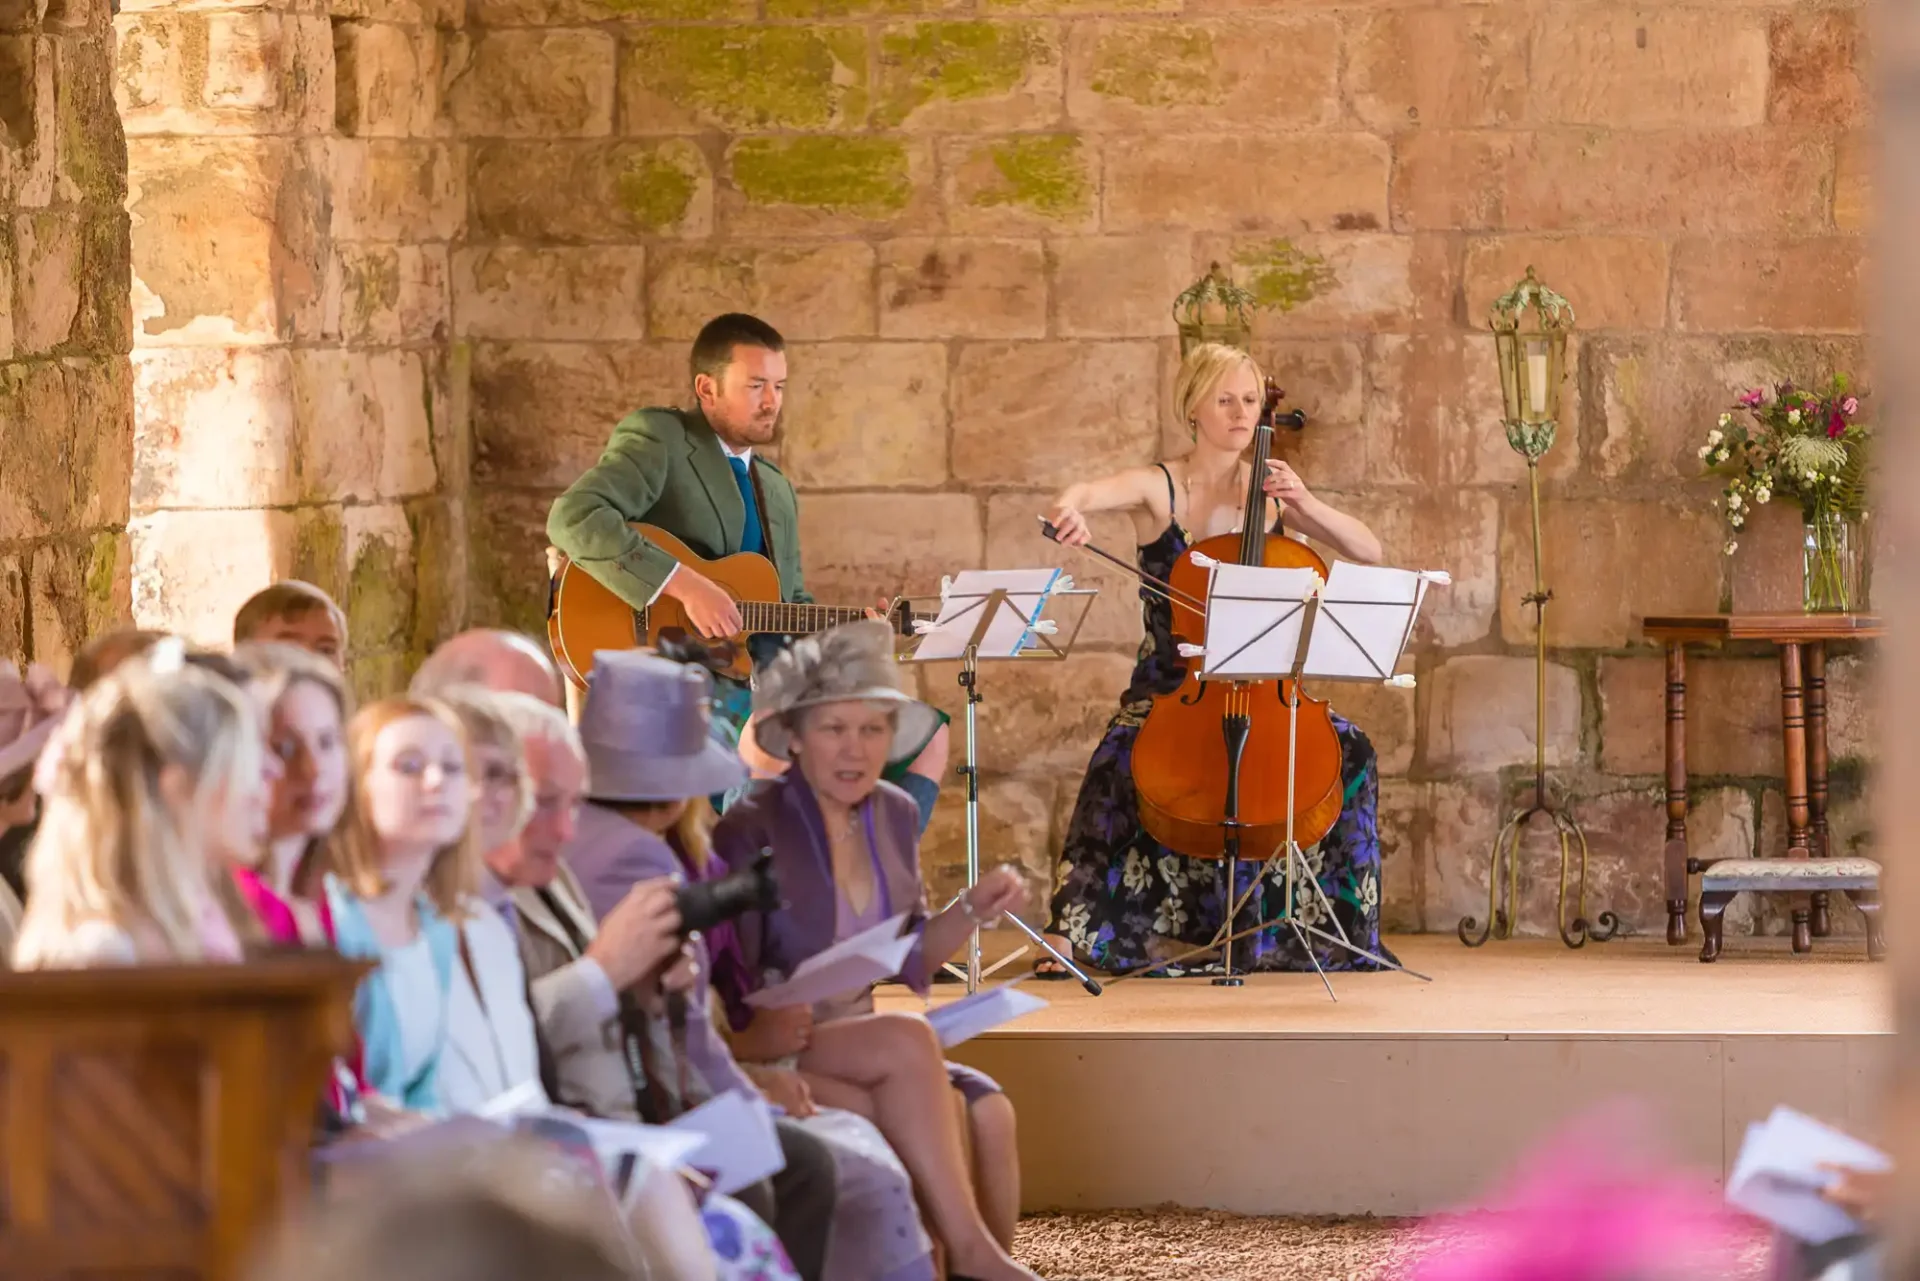 Two musicians, a guitarist and a cellist, perform for an audience at an outdoor event, with listeners seated holding programs.